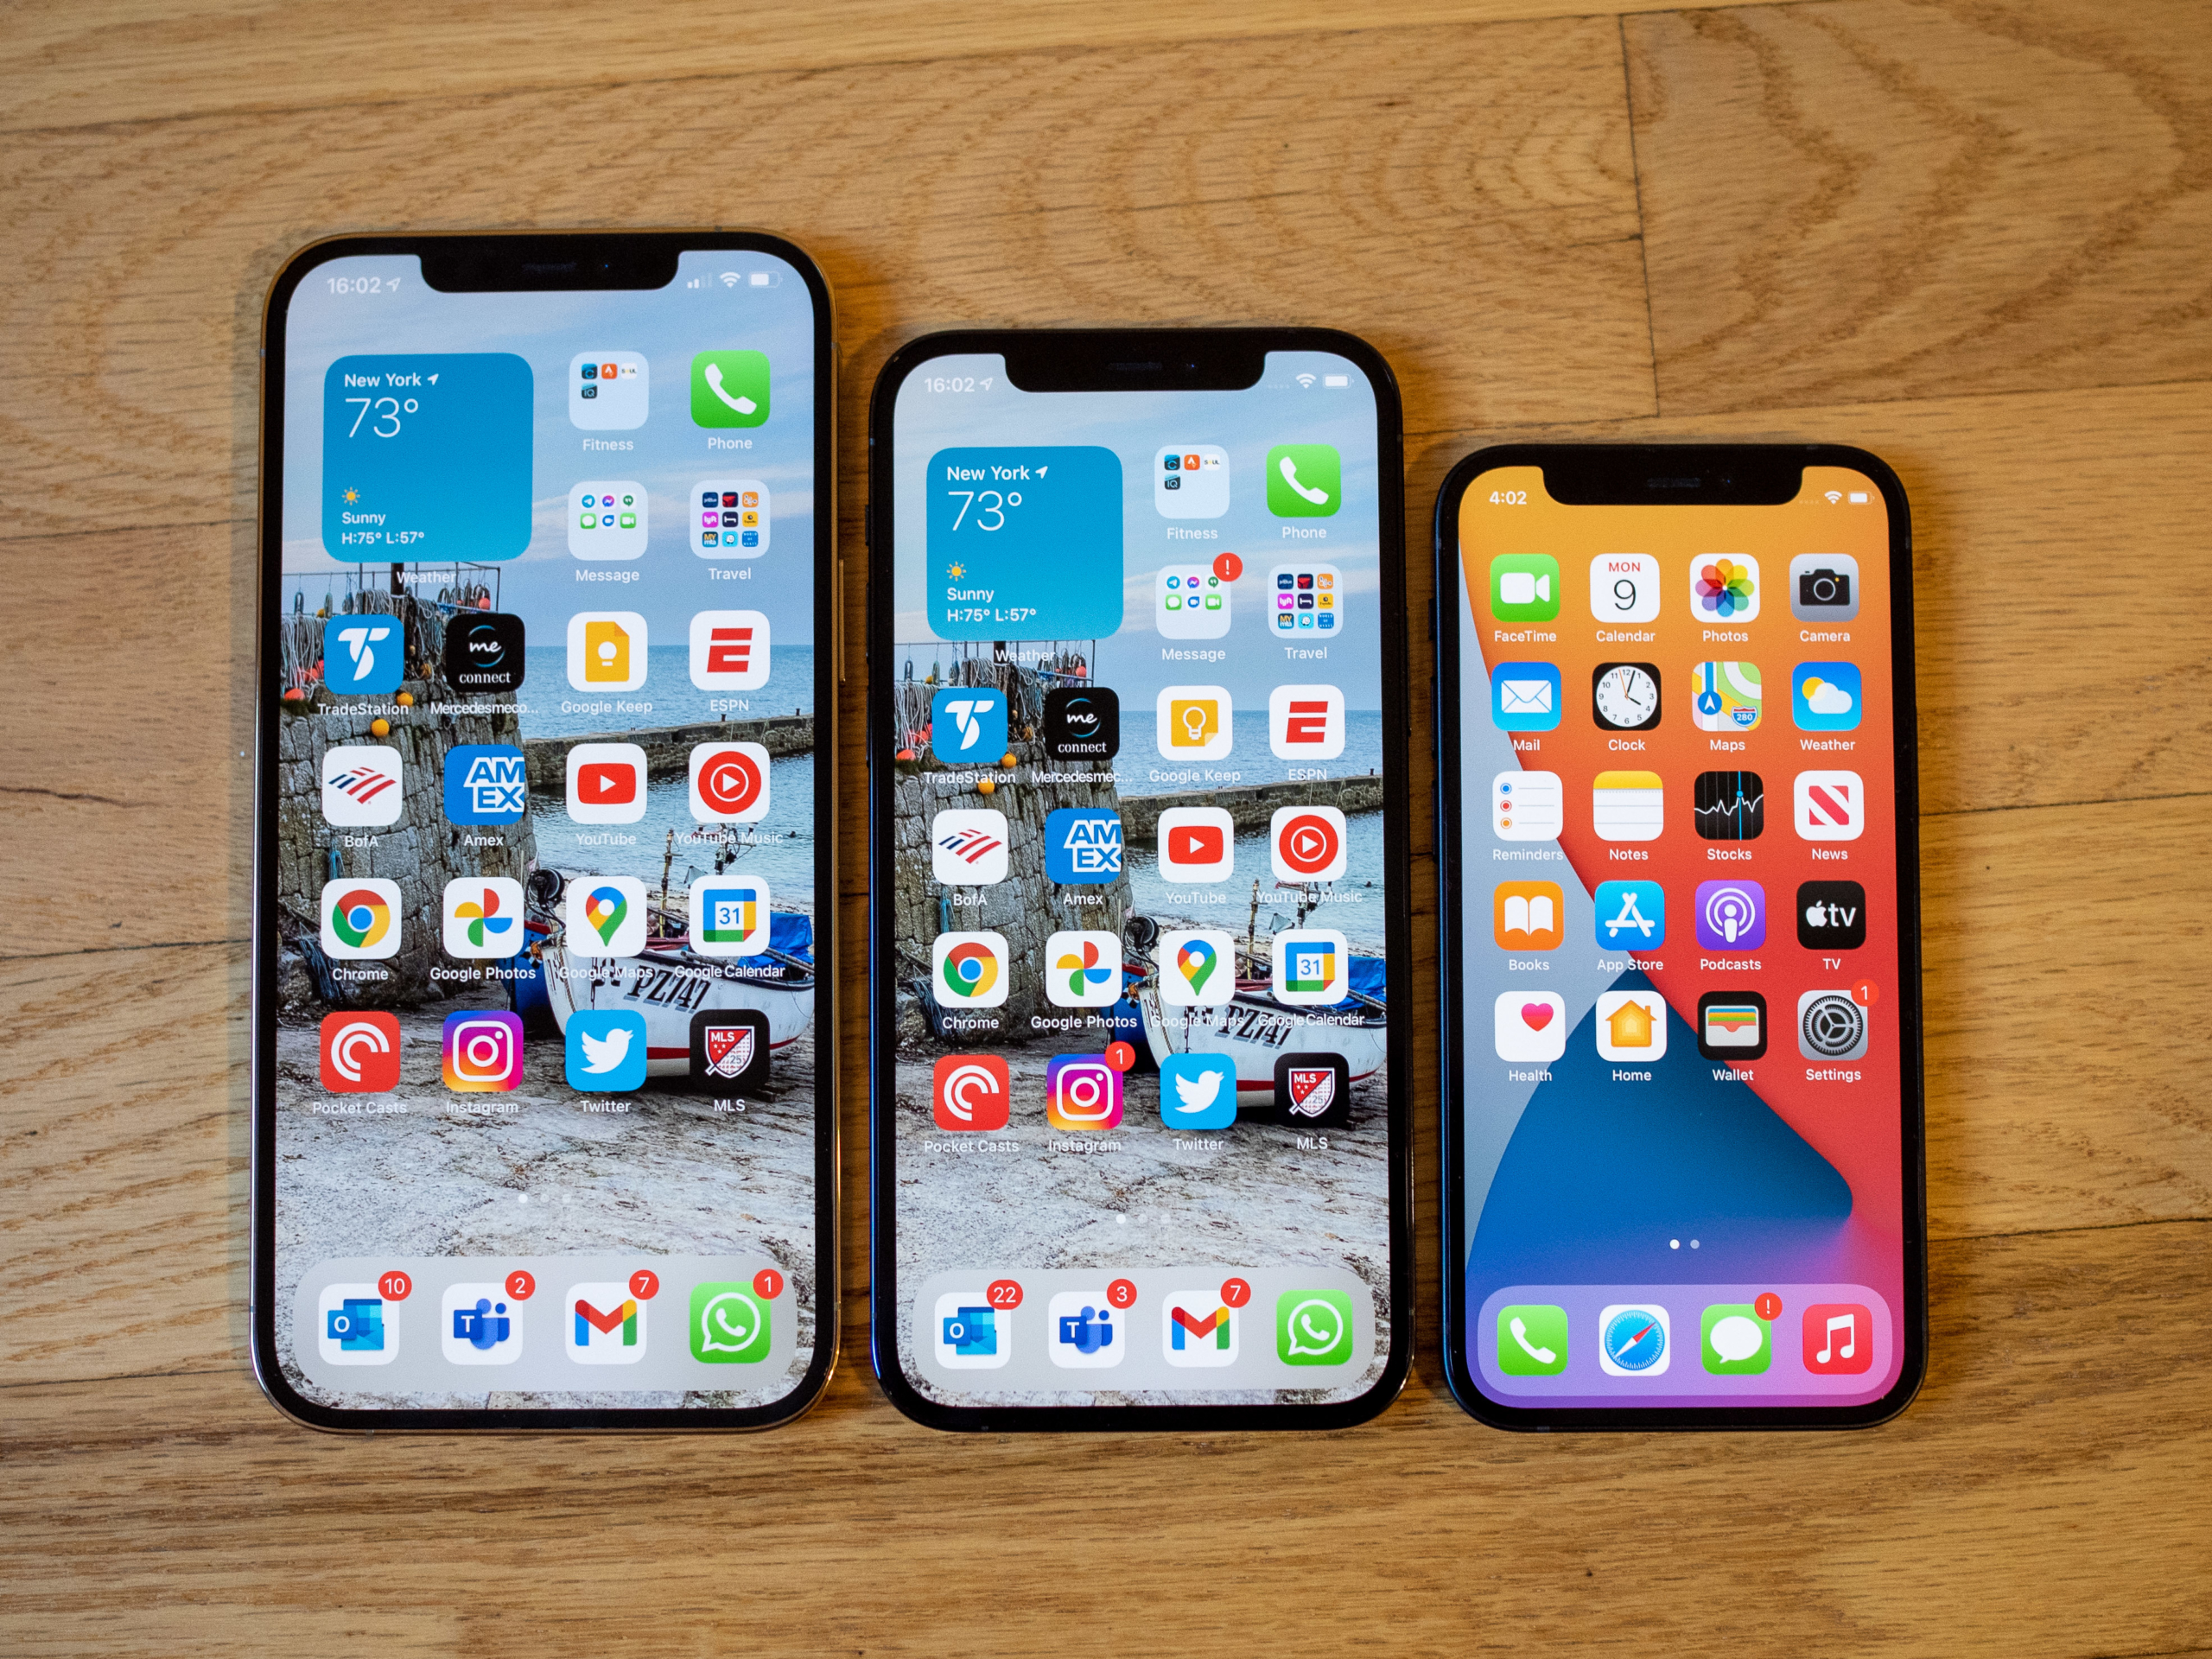 iphone 1 2 3 4 5 differences